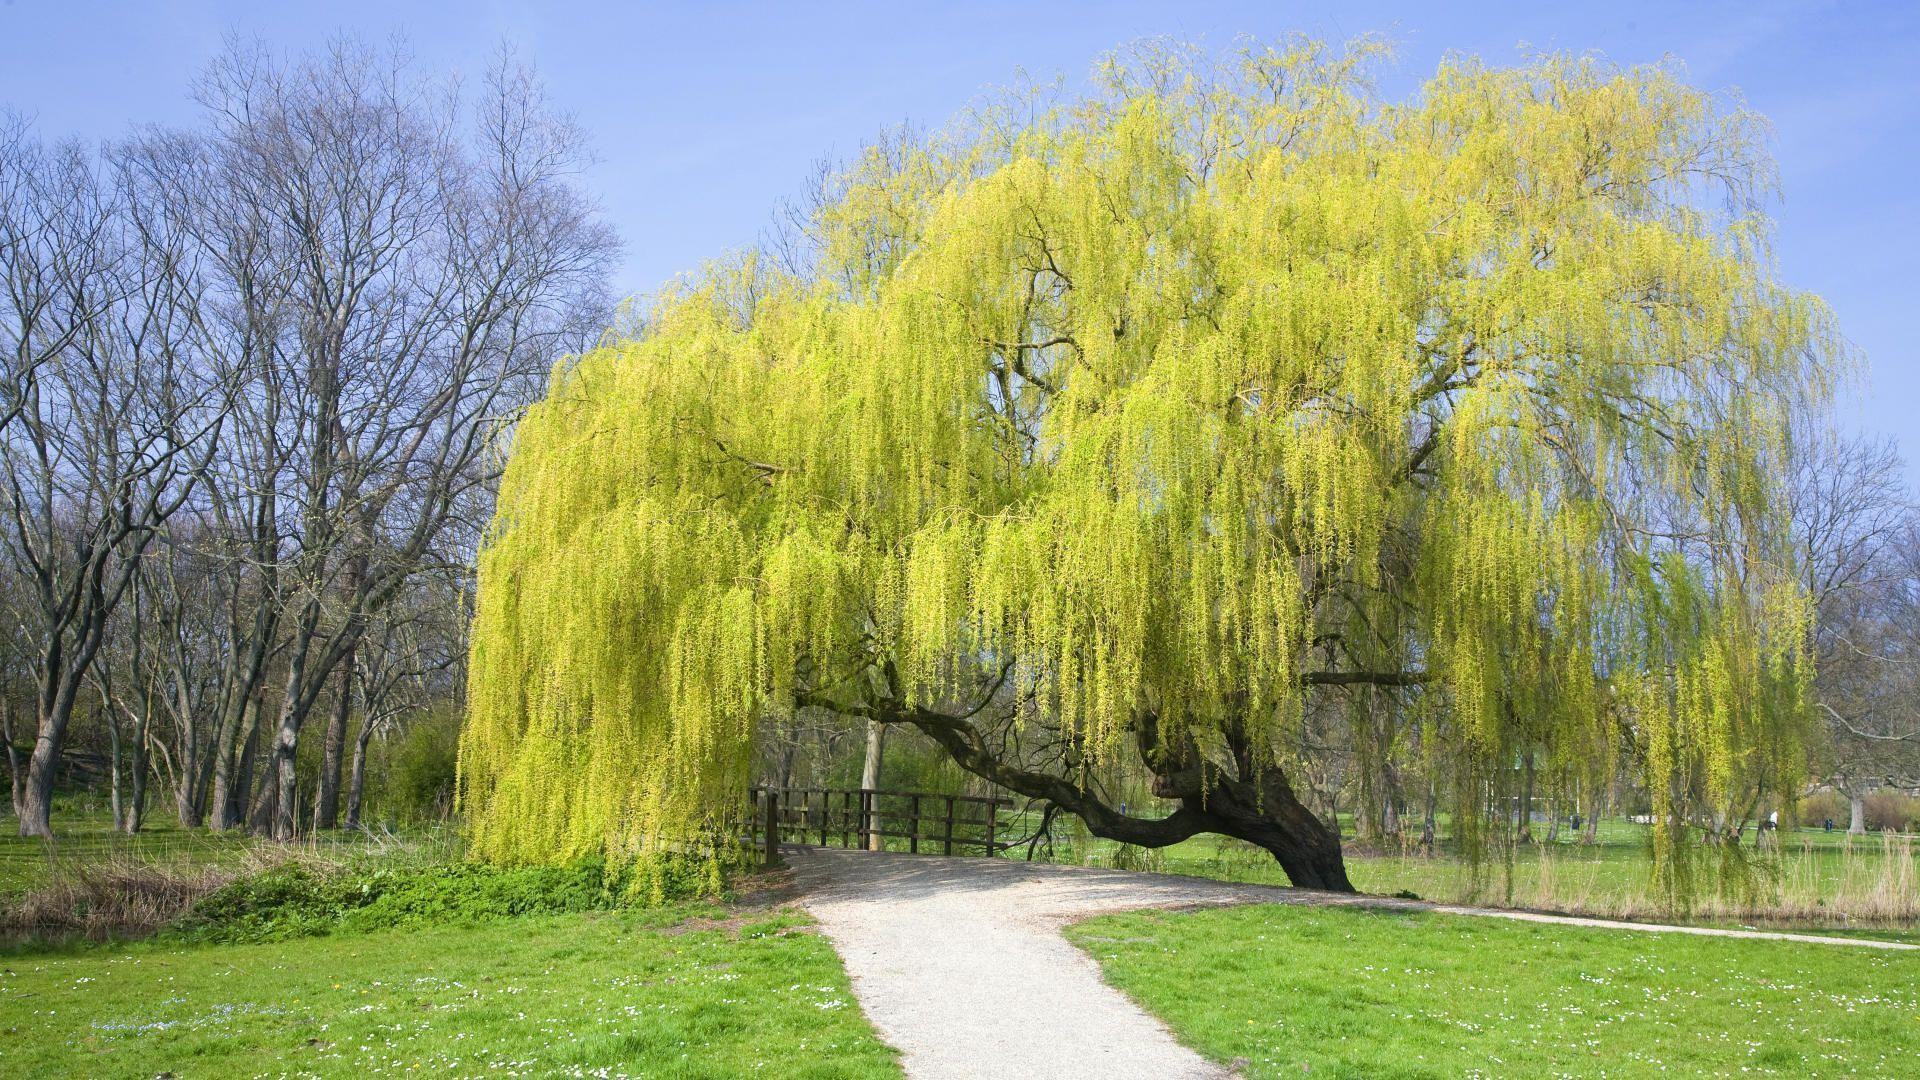 About The Weeping Willow Tree